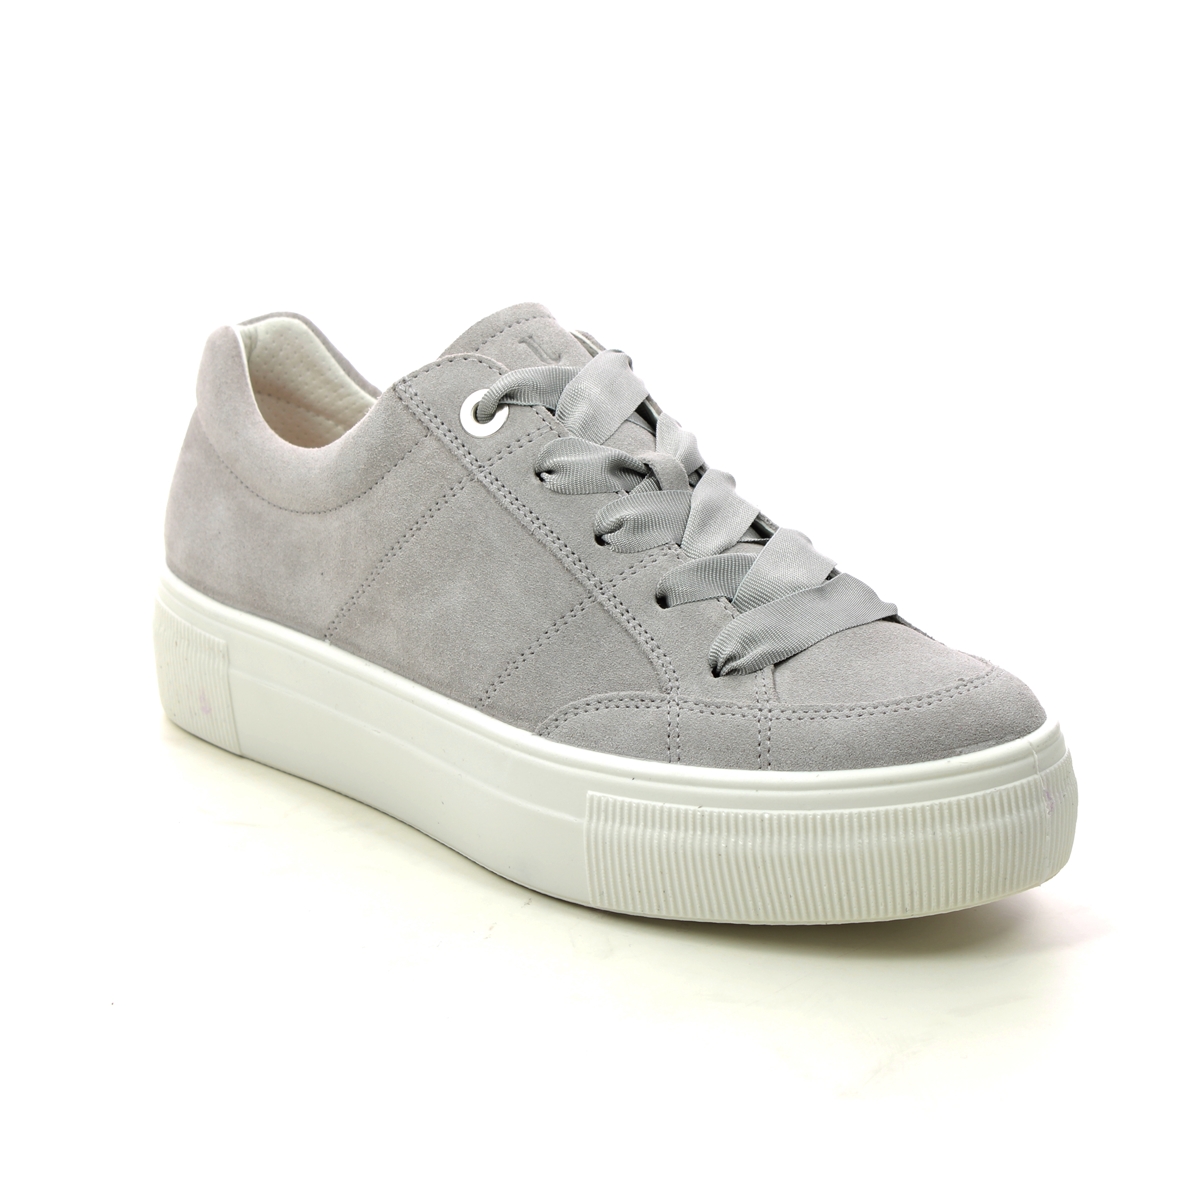 Legero Lima Stitch Light Grey Suede Womens Trainers 0600910-2500 In Size 41 In Plain Light Grey Suede